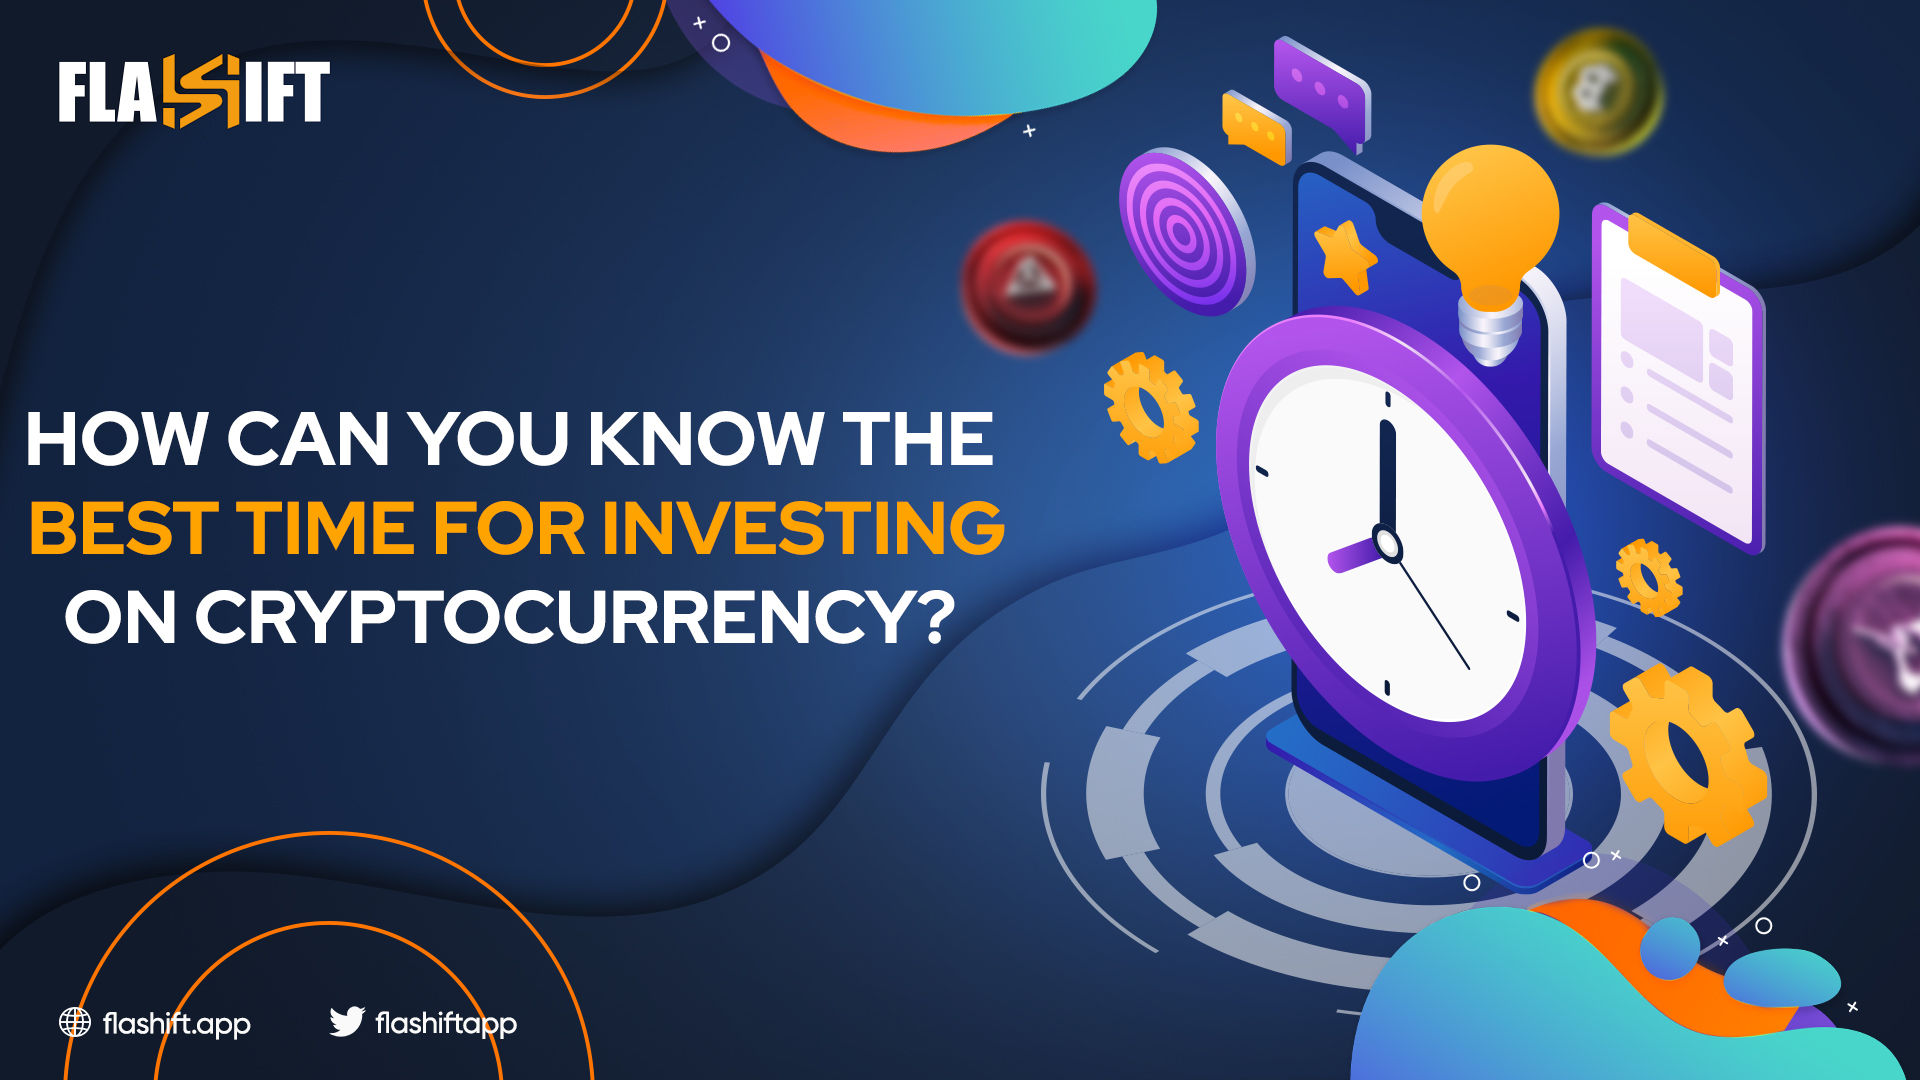 How to know the best time for investing in Cryptocurrencies?